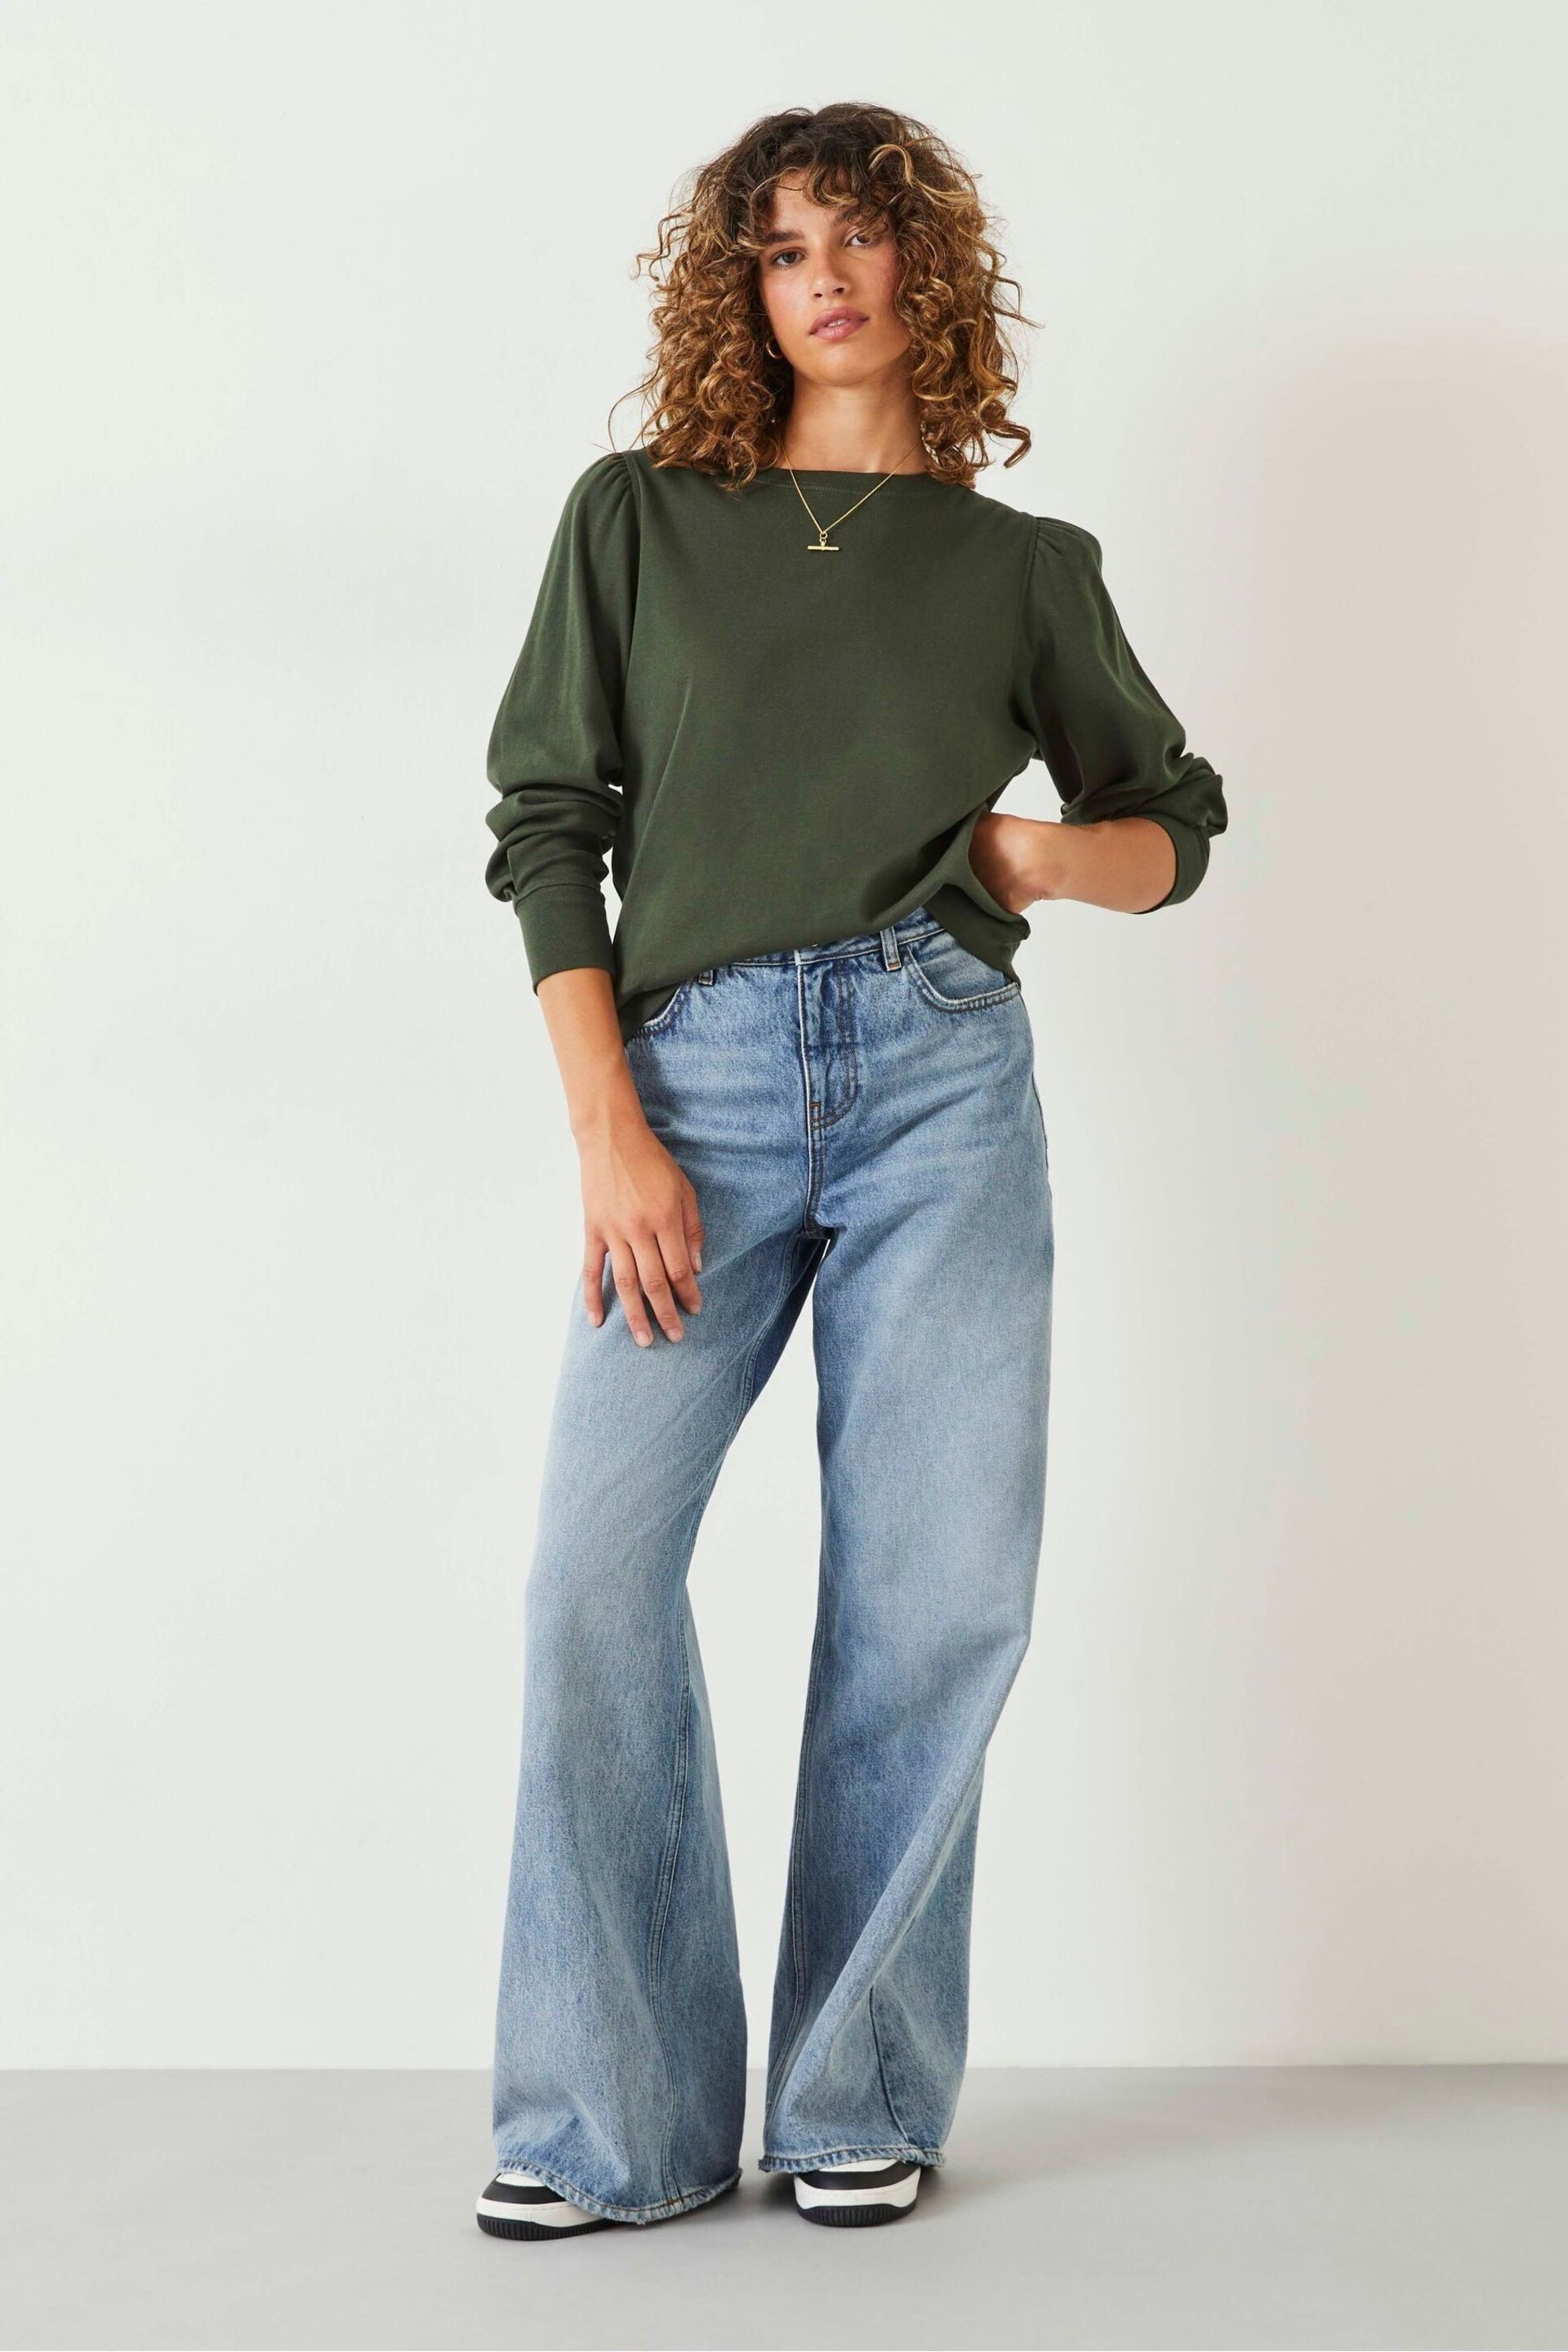 Hush Green Emily Puff Sleeve Jersey Top - Image 1 of 5